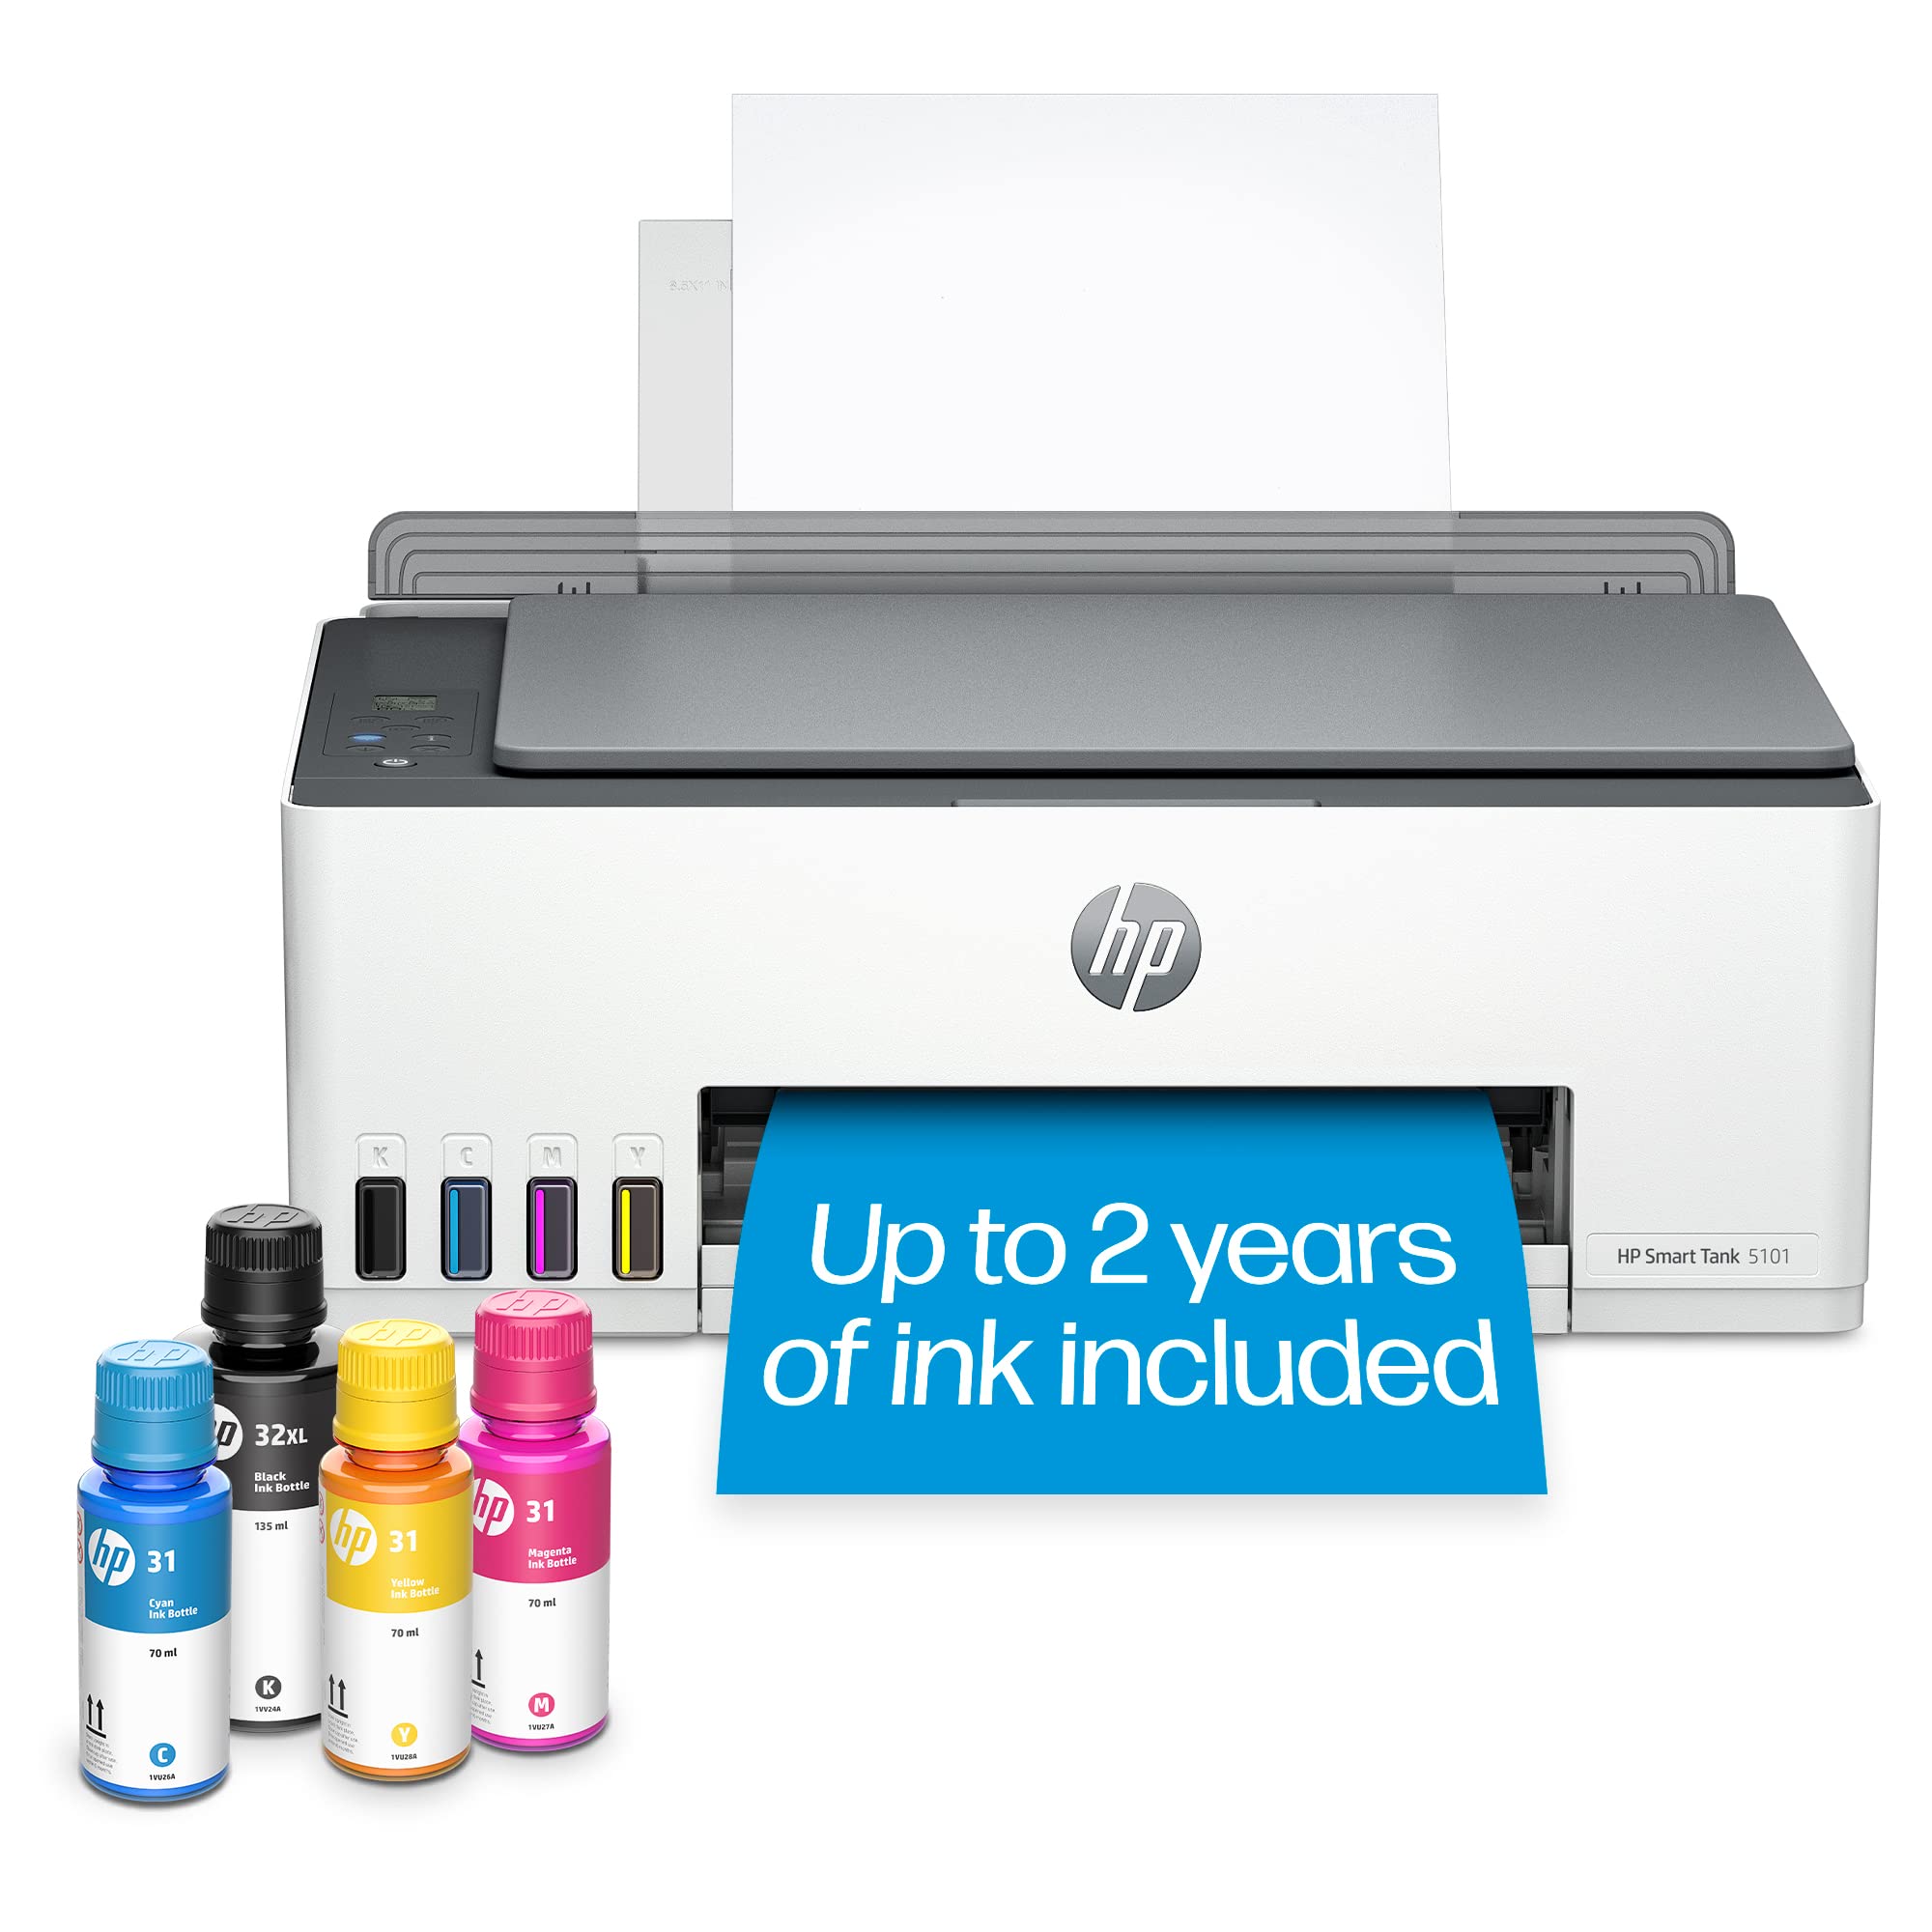 HP Smart-Tank 5101 Wireless All-in-One Ink-Tank Printer with up to 2 Years of Ink Included (1F3Y0A),White